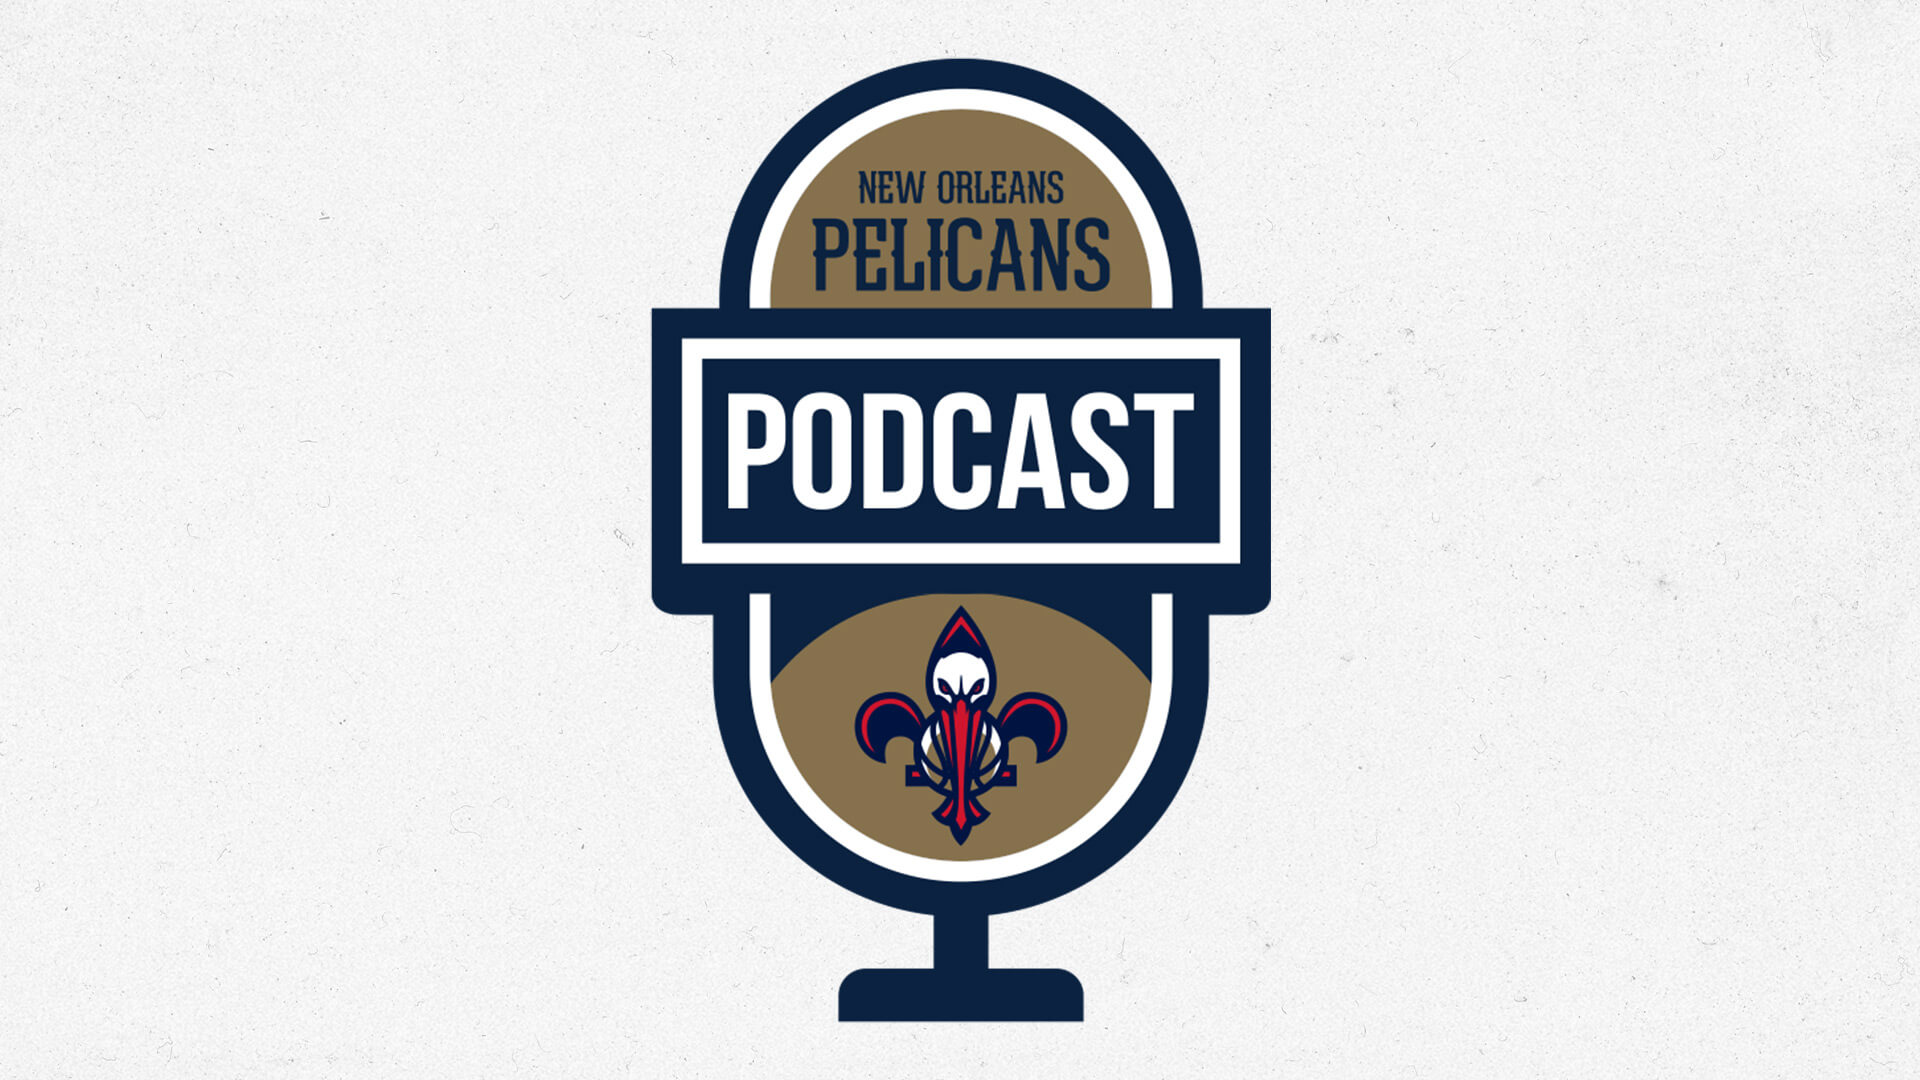 Pelicans vs. Lakers NBA Play-In Tournament preview | Pelicans Podcast